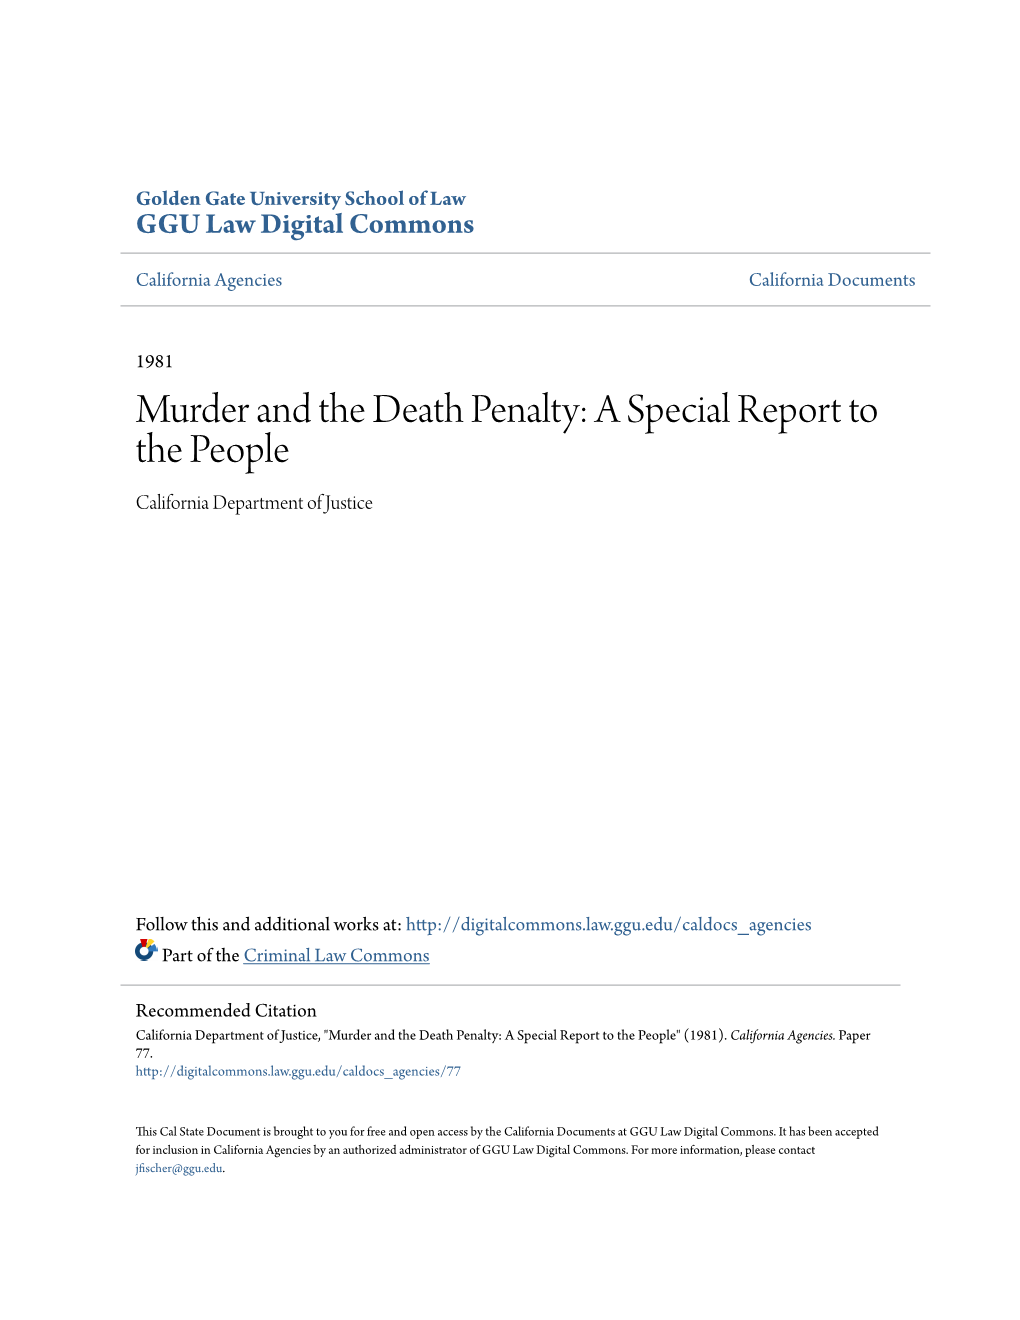 Murder and the Death Penalty: a Special Report to the People California Department of Justice